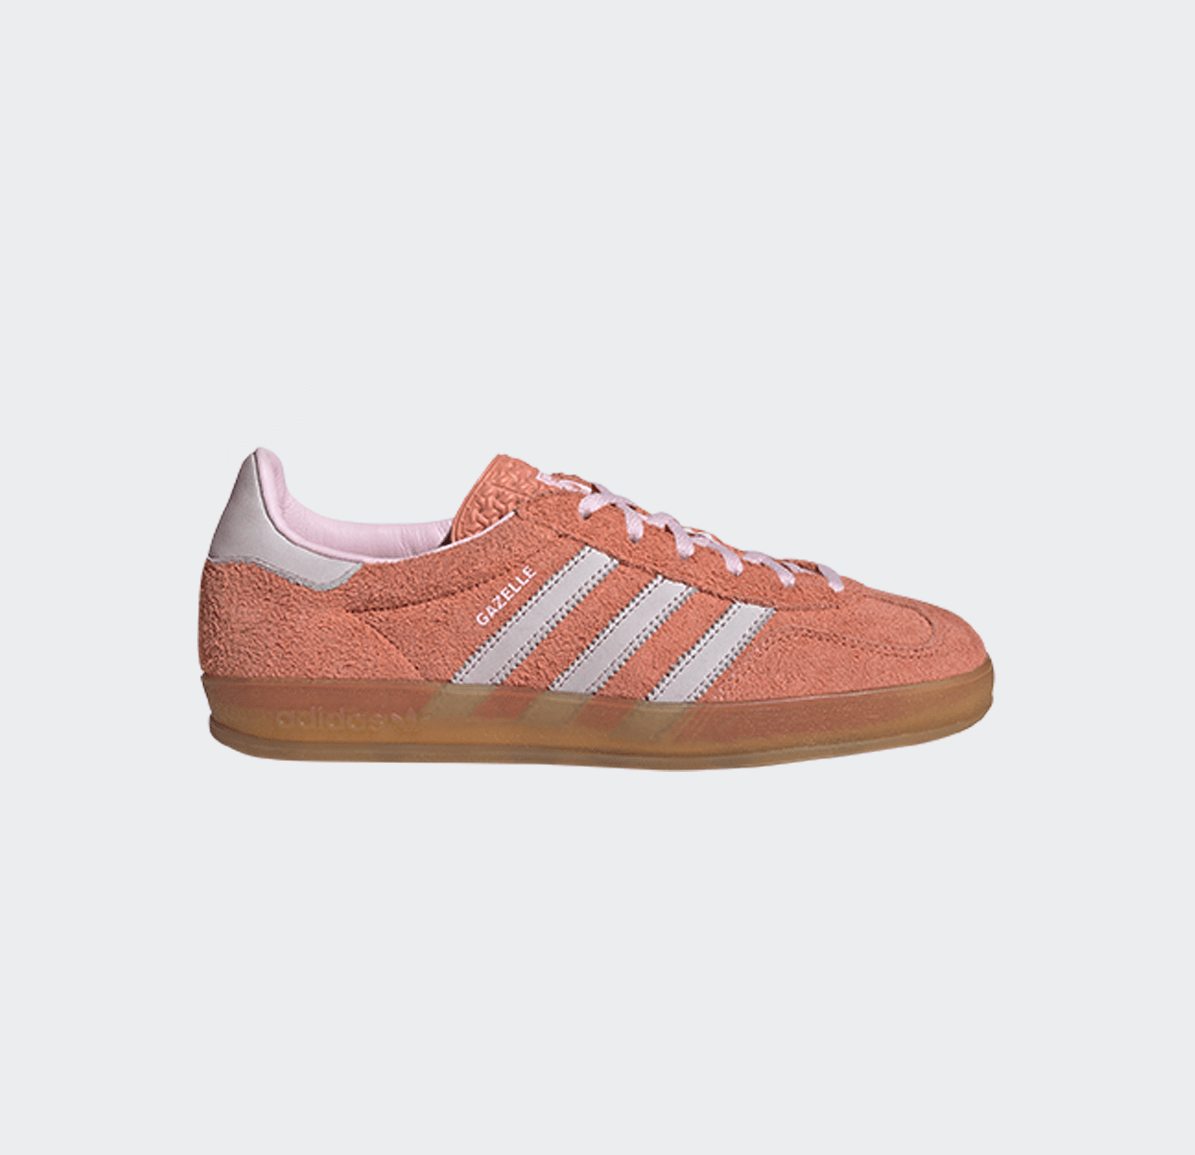 Adidas Gazelle Indoor Womens - Wonder Clay/Clear Pink/Gum - Adidas - State Of Play